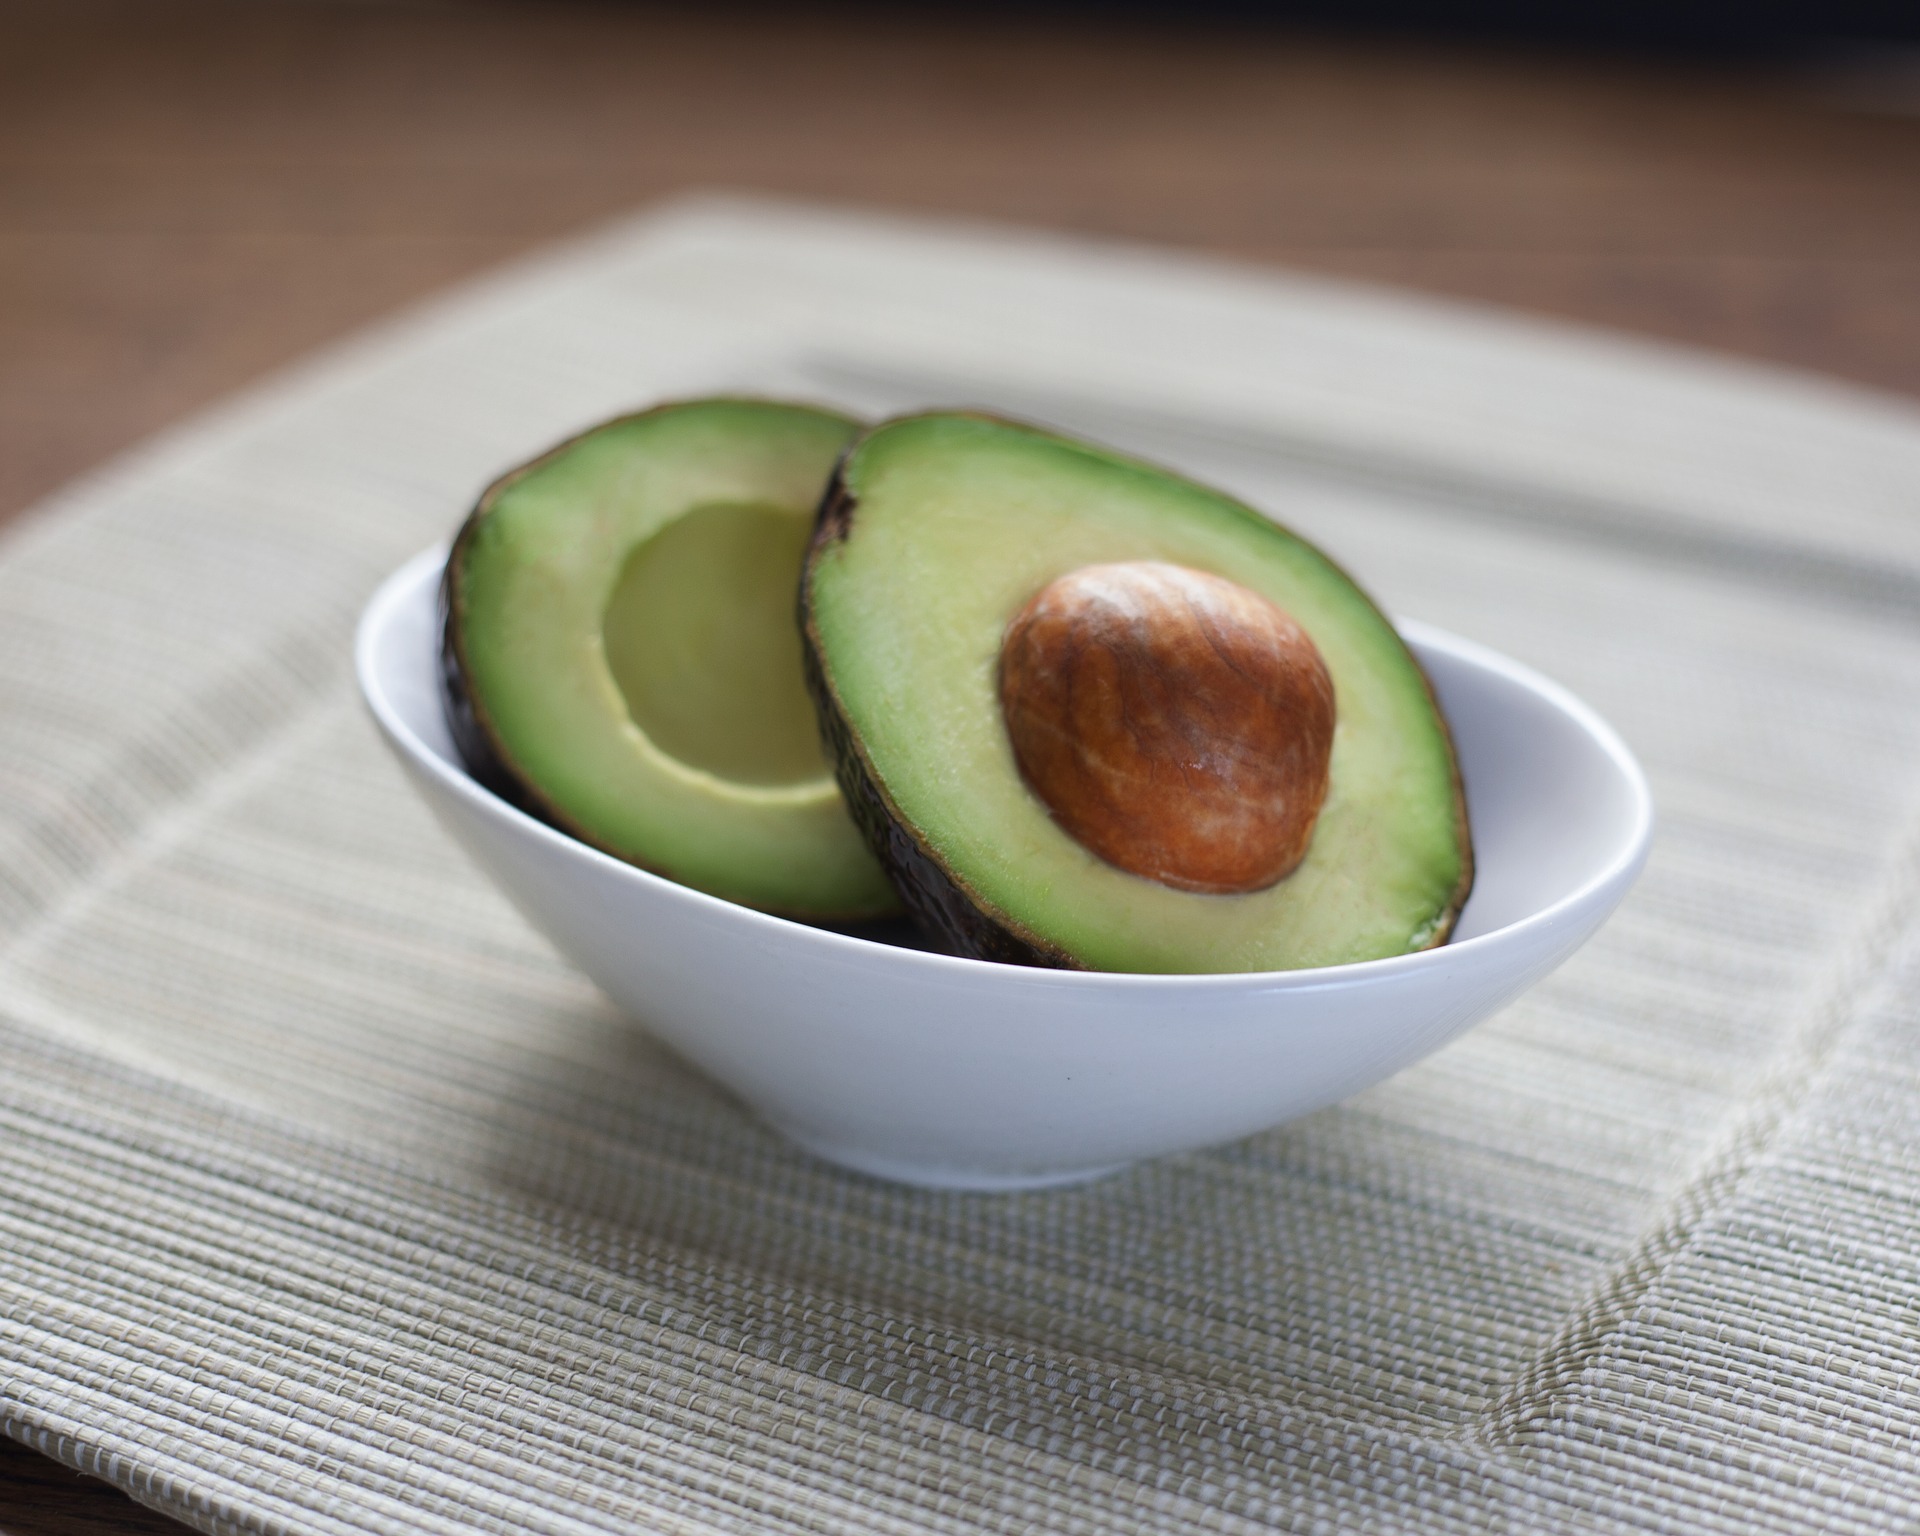 There are a variety of reasons that breastfeeding and avocados are a great pair.